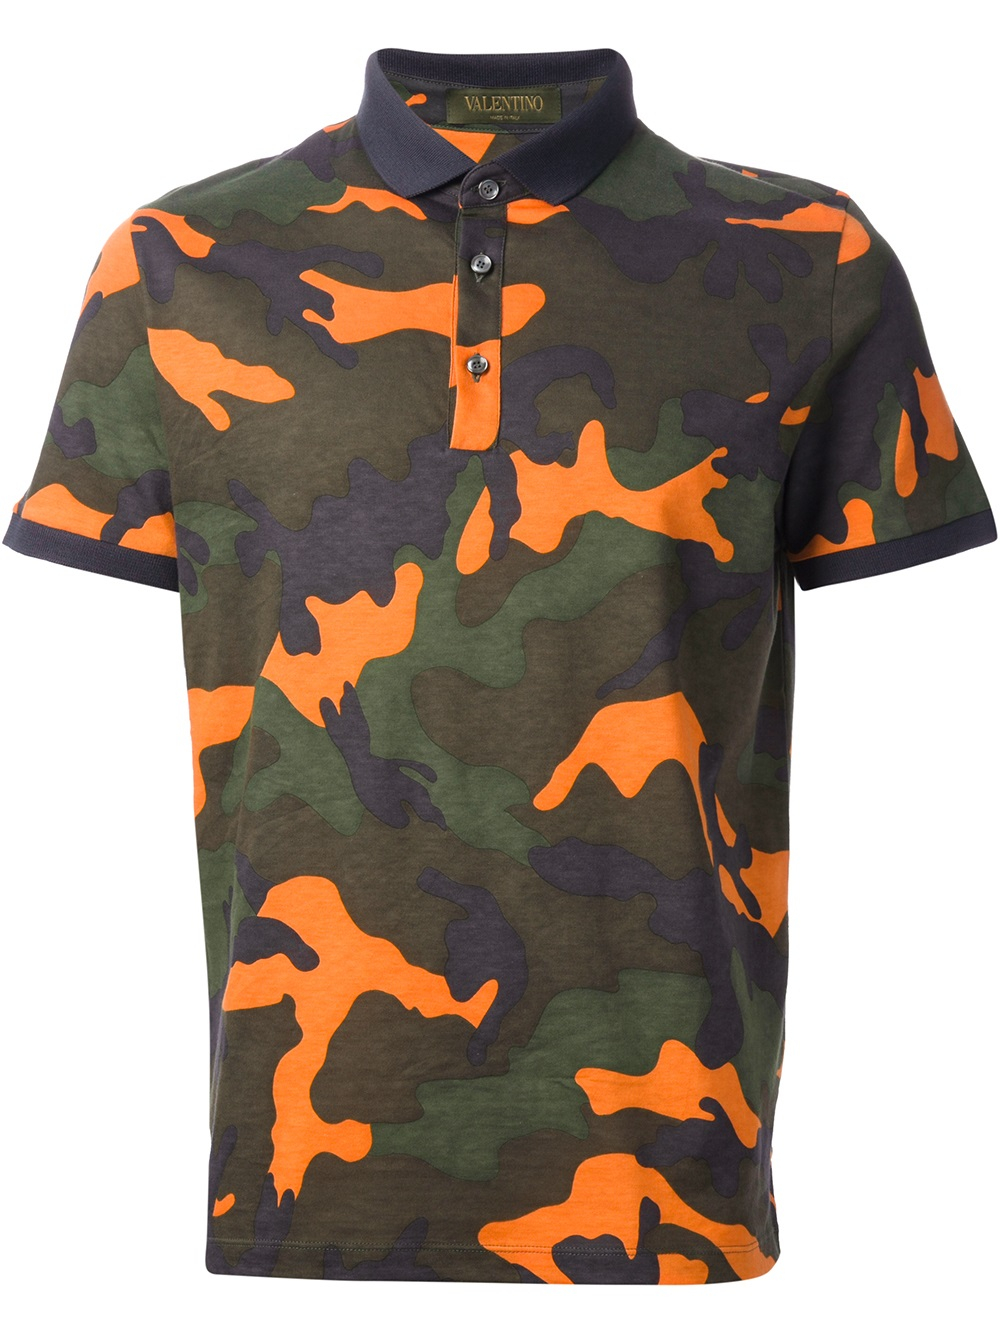 Valentino Camouflage Polo Shirt in Green for Men - Lyst